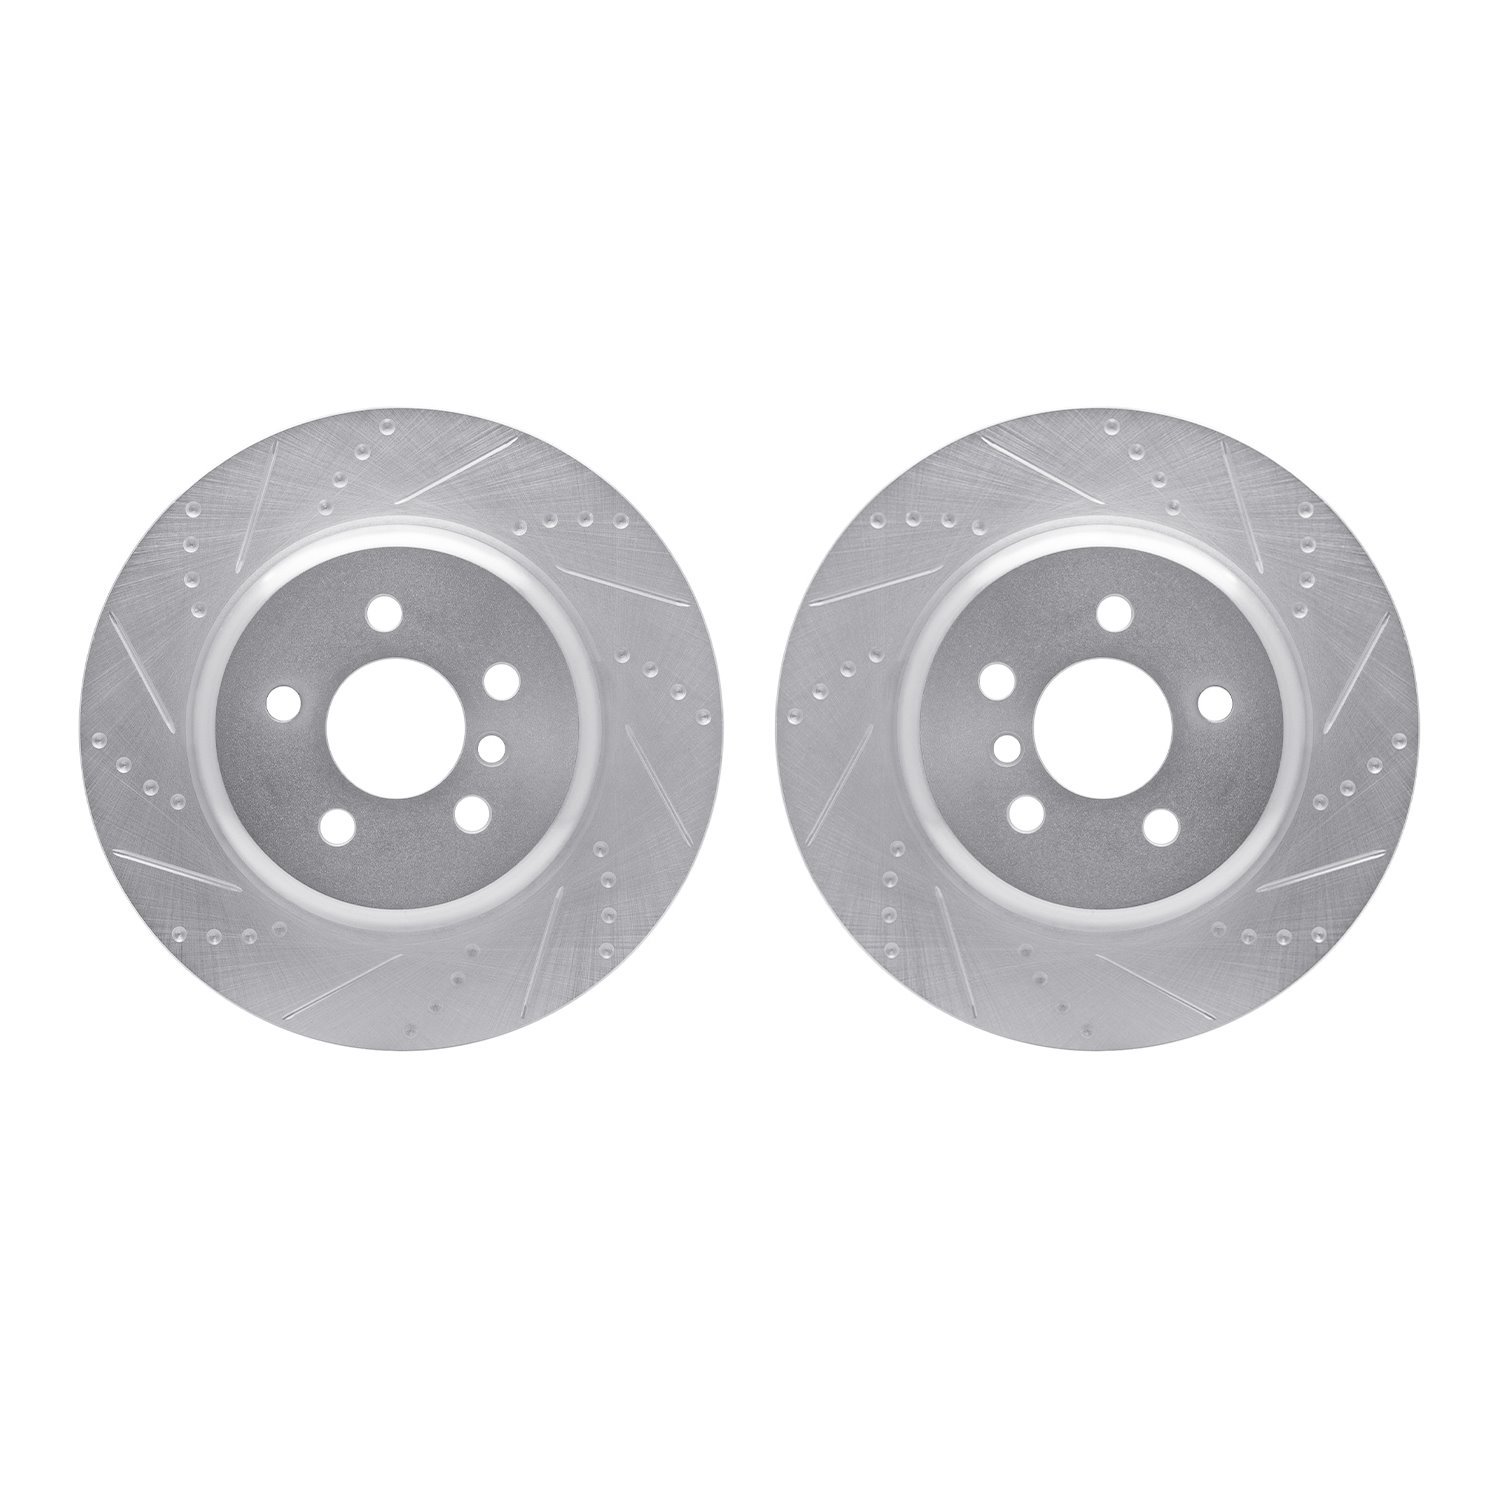 7002-31089 Drilled/Slotted Brake Rotors [Silver], Fits Select Multiple Makes/Models, Position: Rear